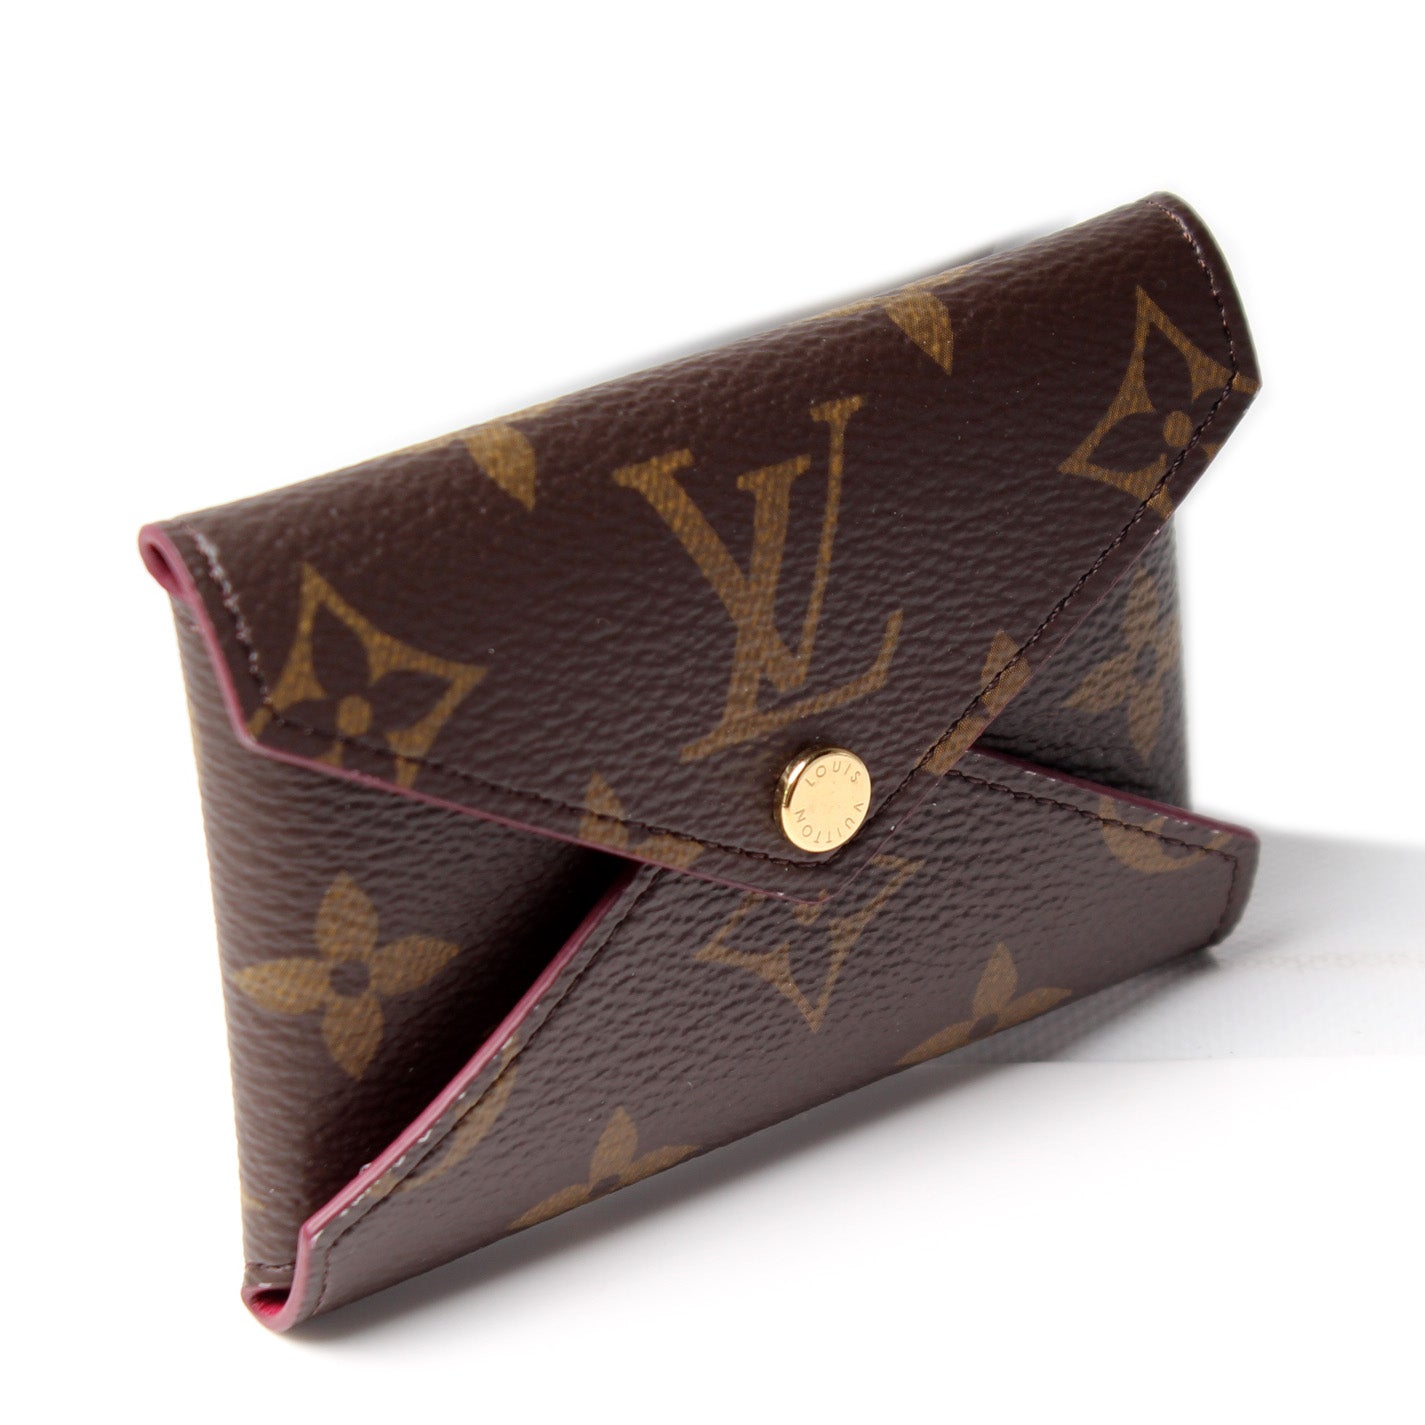 Authentic Louis Vuitton Kirigami Small pouch Excellent Cond.